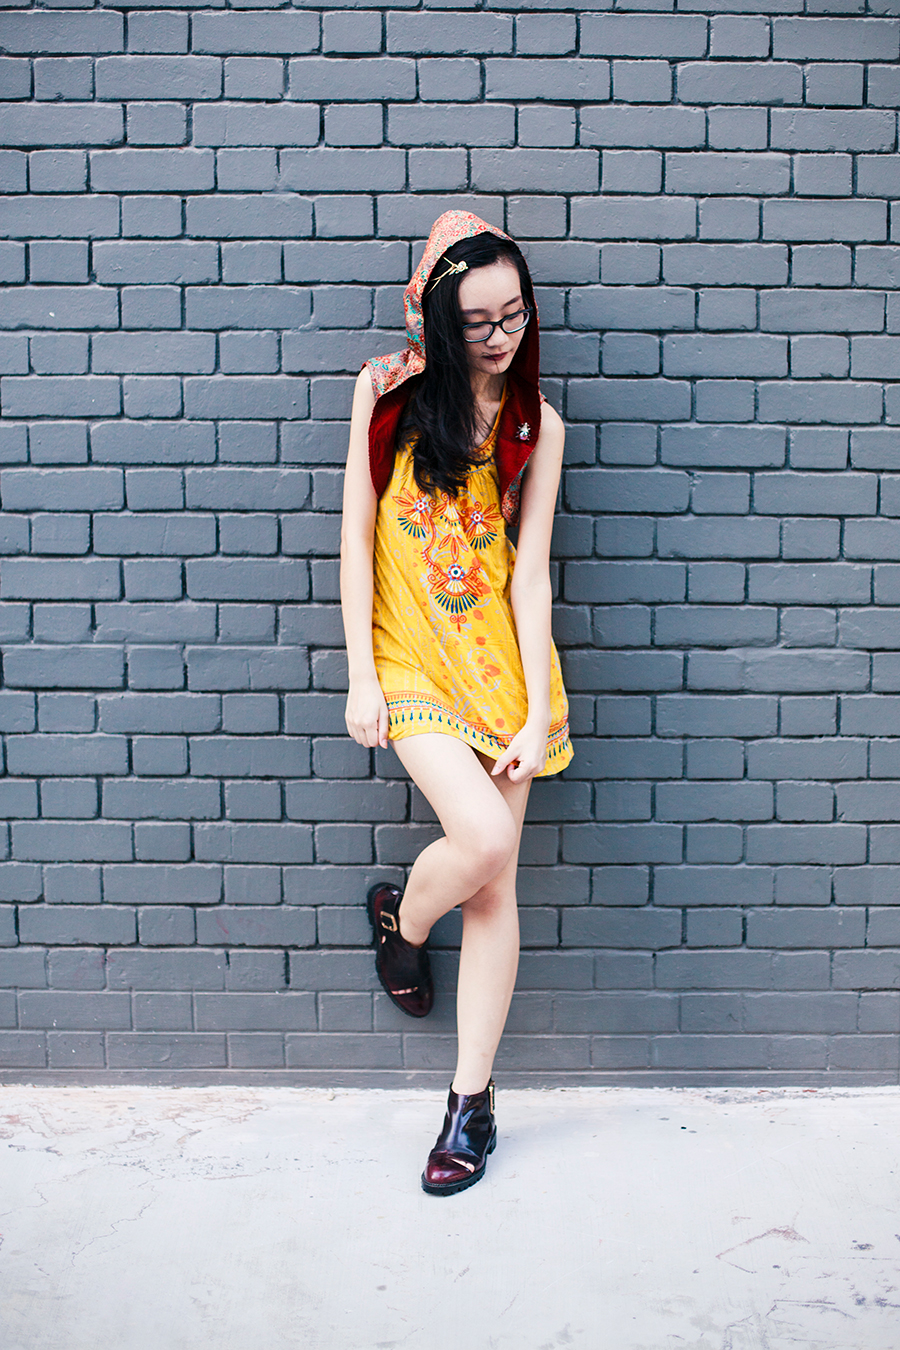 Born of Fire outfit: Irresistible Me Sophia Hair Chain, Forever 21 yellow embroidered tunic dress, Jeffrey Campbell cutout wine booties.